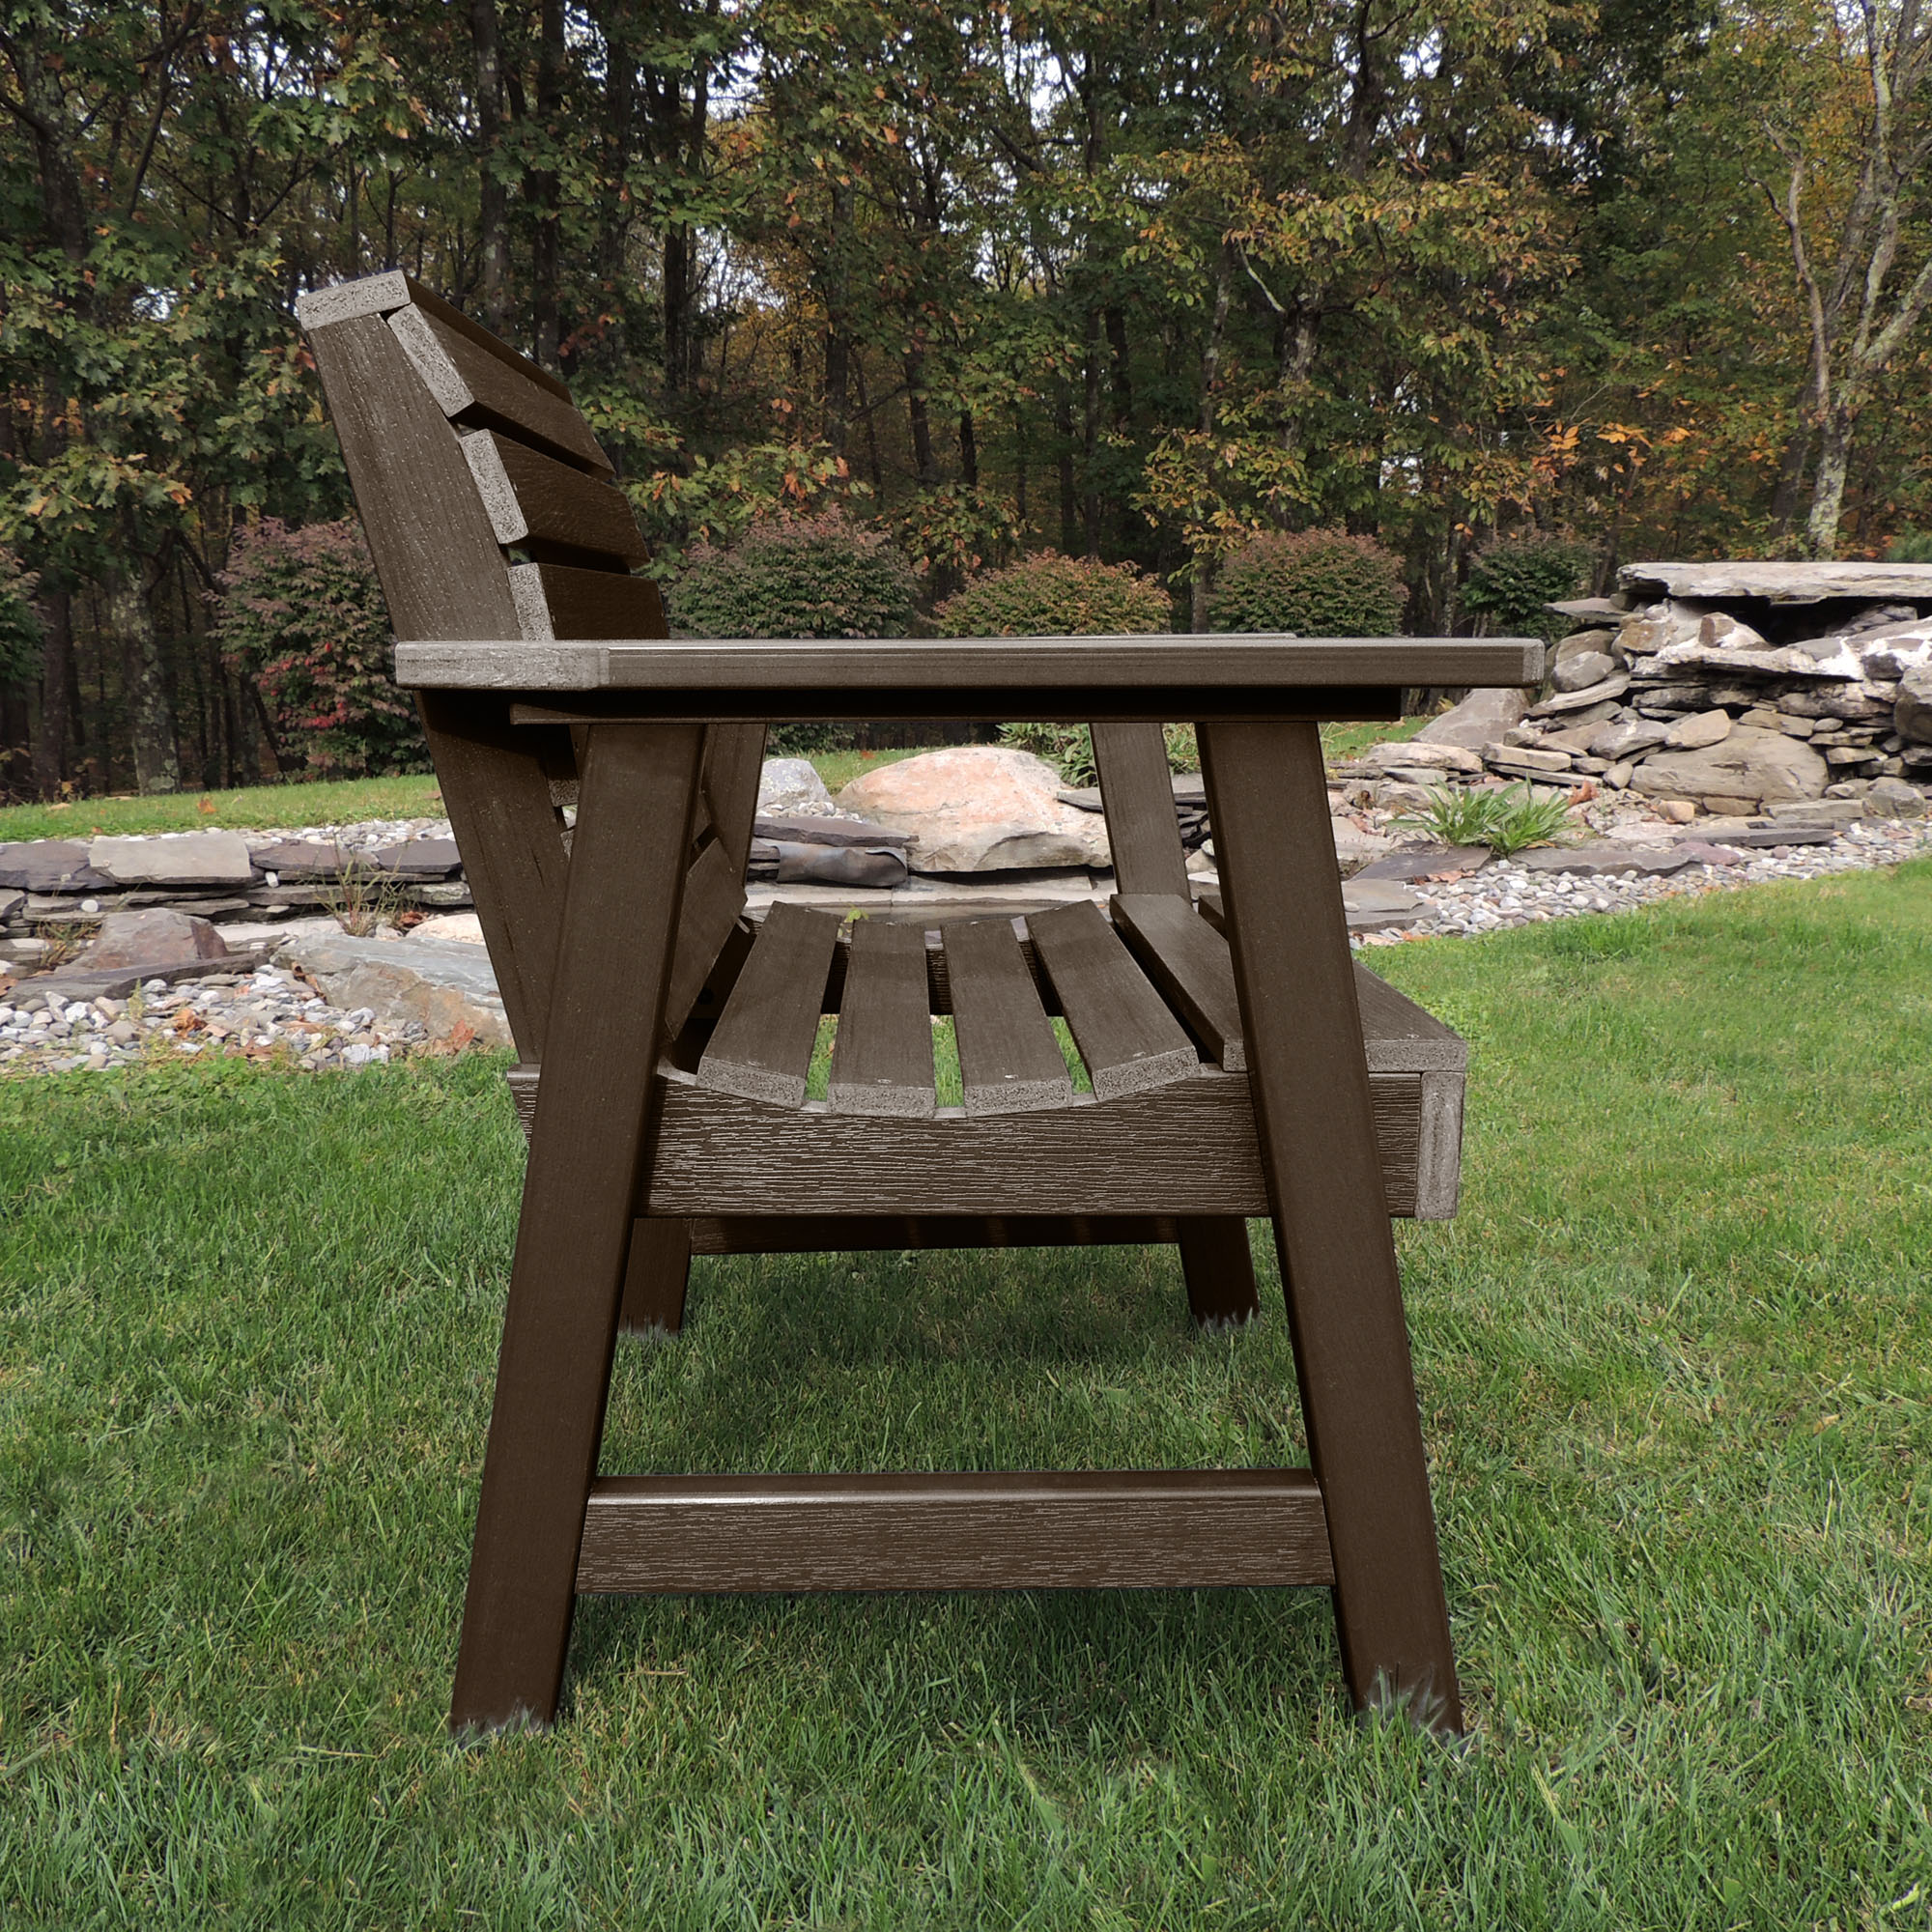 Highwood Weatherly Garden Chair - image 4 of 5